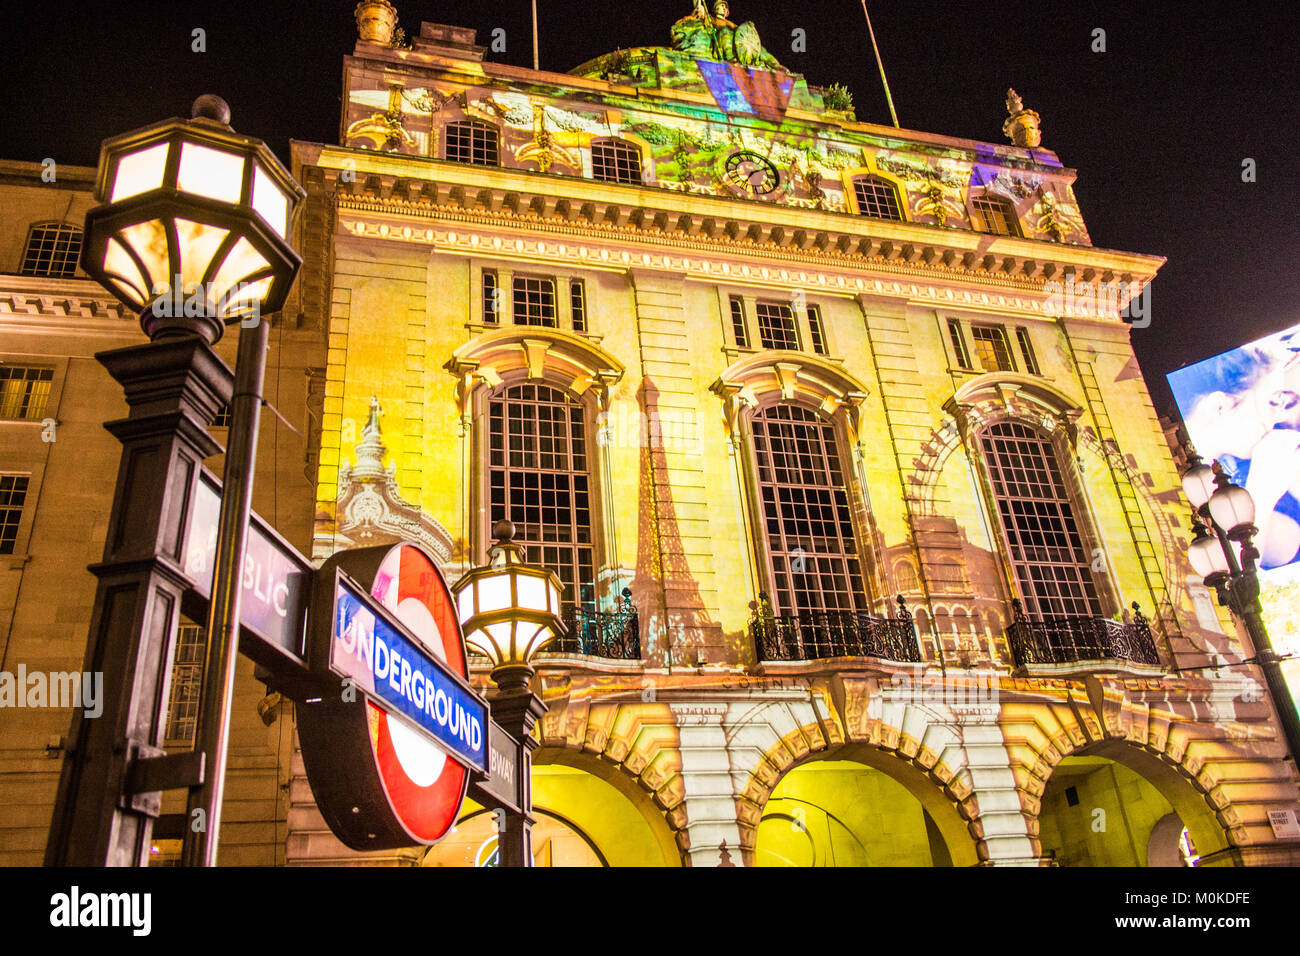 "Lumiere"-Festival im Piccadilly Circus, London,. Stockfoto